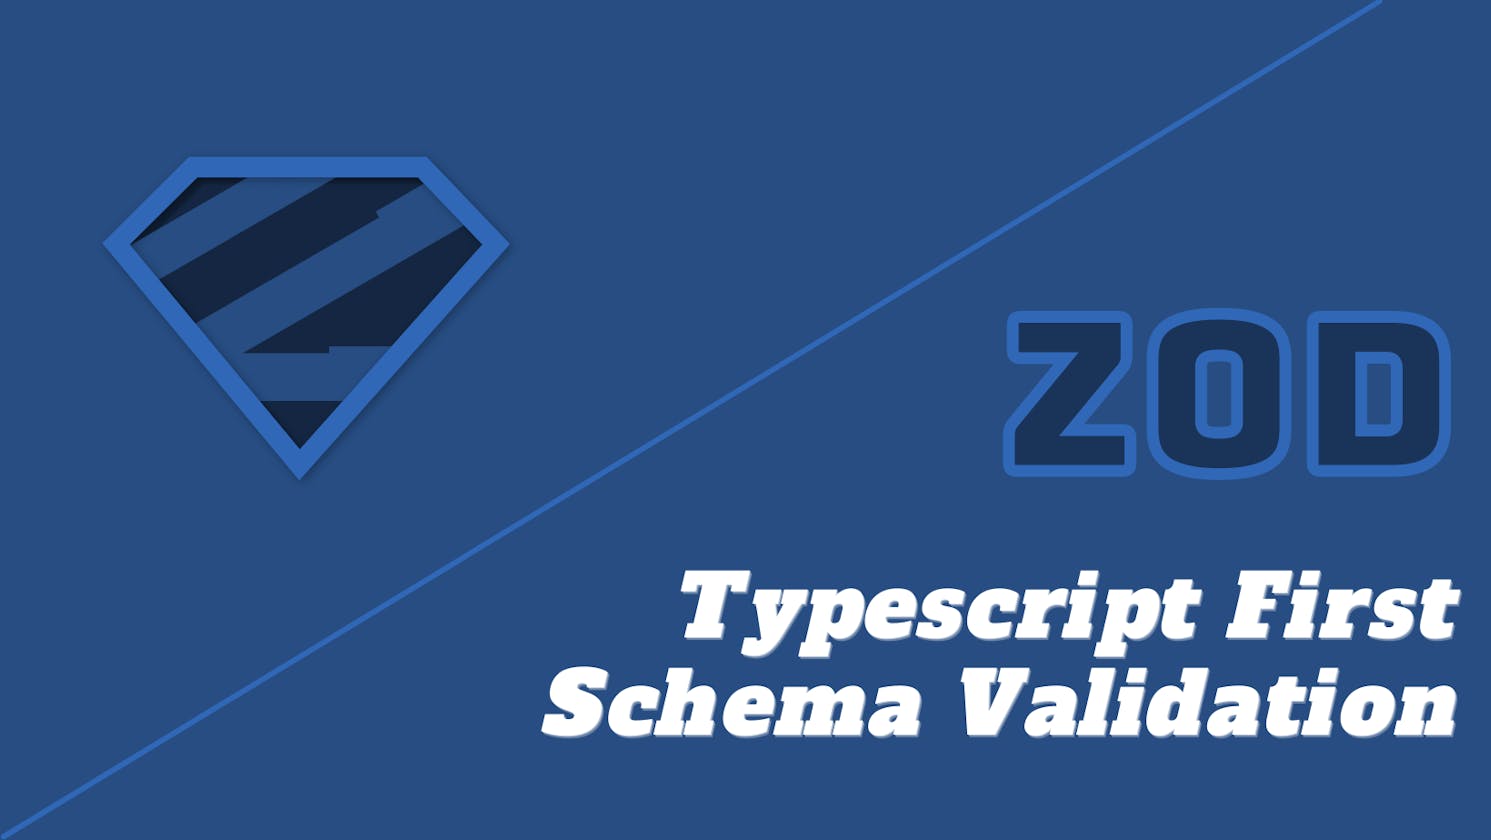 Validate your data with Zod